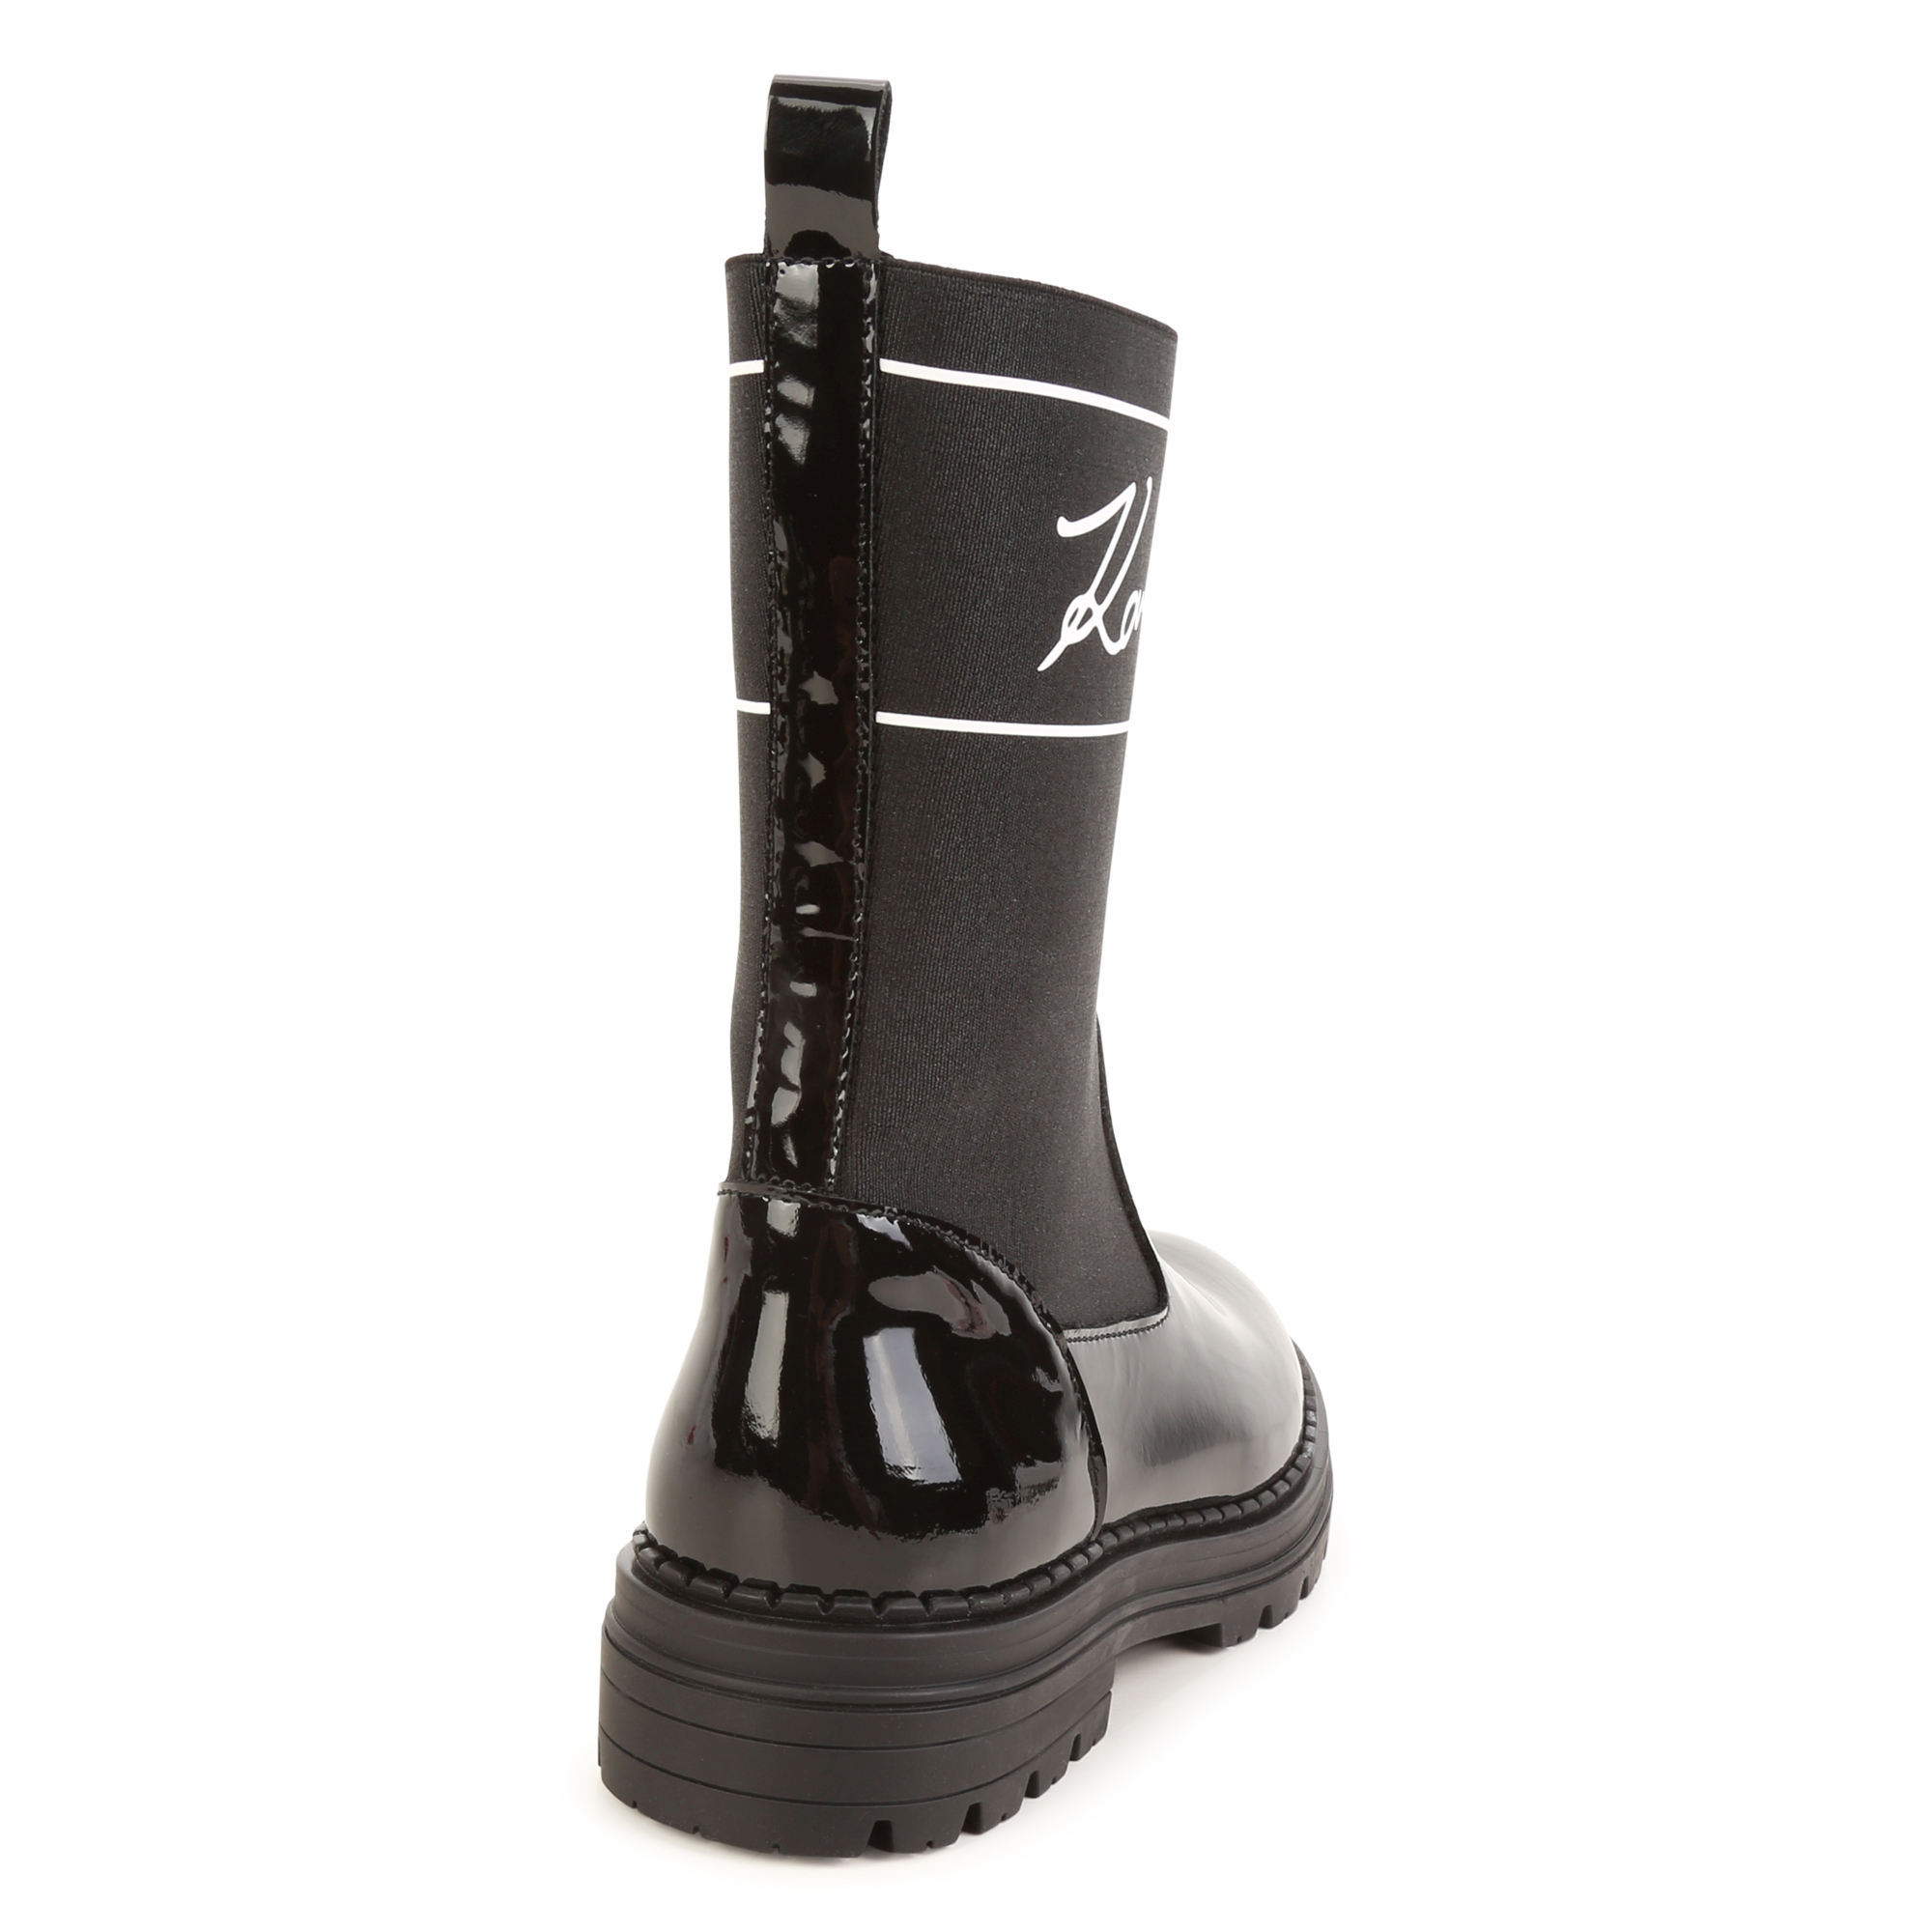 Tall elasticated boots KARL LAGERFELD KIDS for GIRL